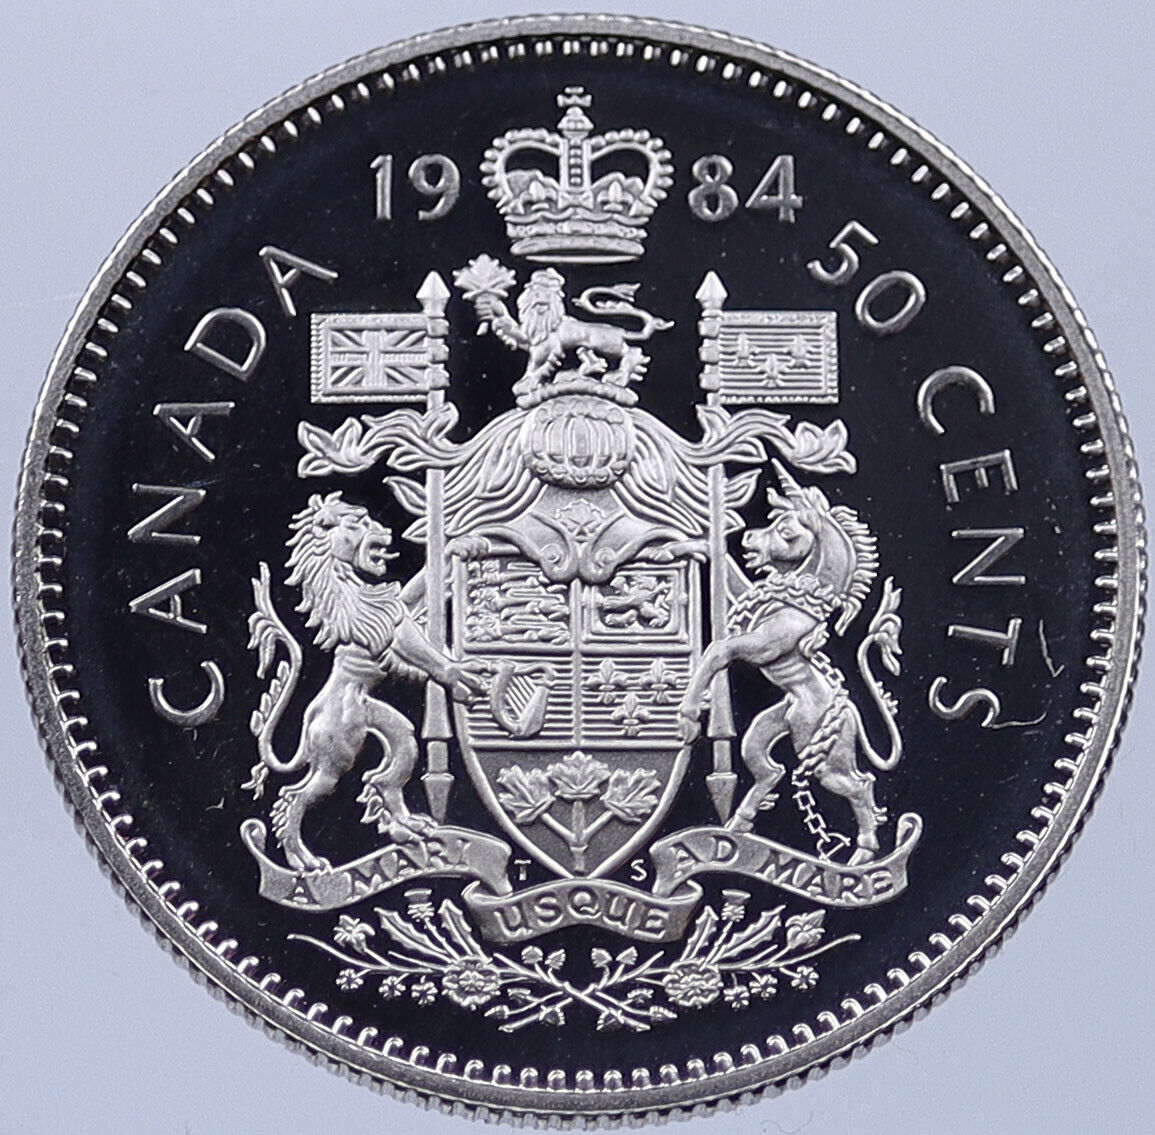 1984 CANADA under UK Queen ELIZABETH II Proof Like 50 CENTS Coin i119005